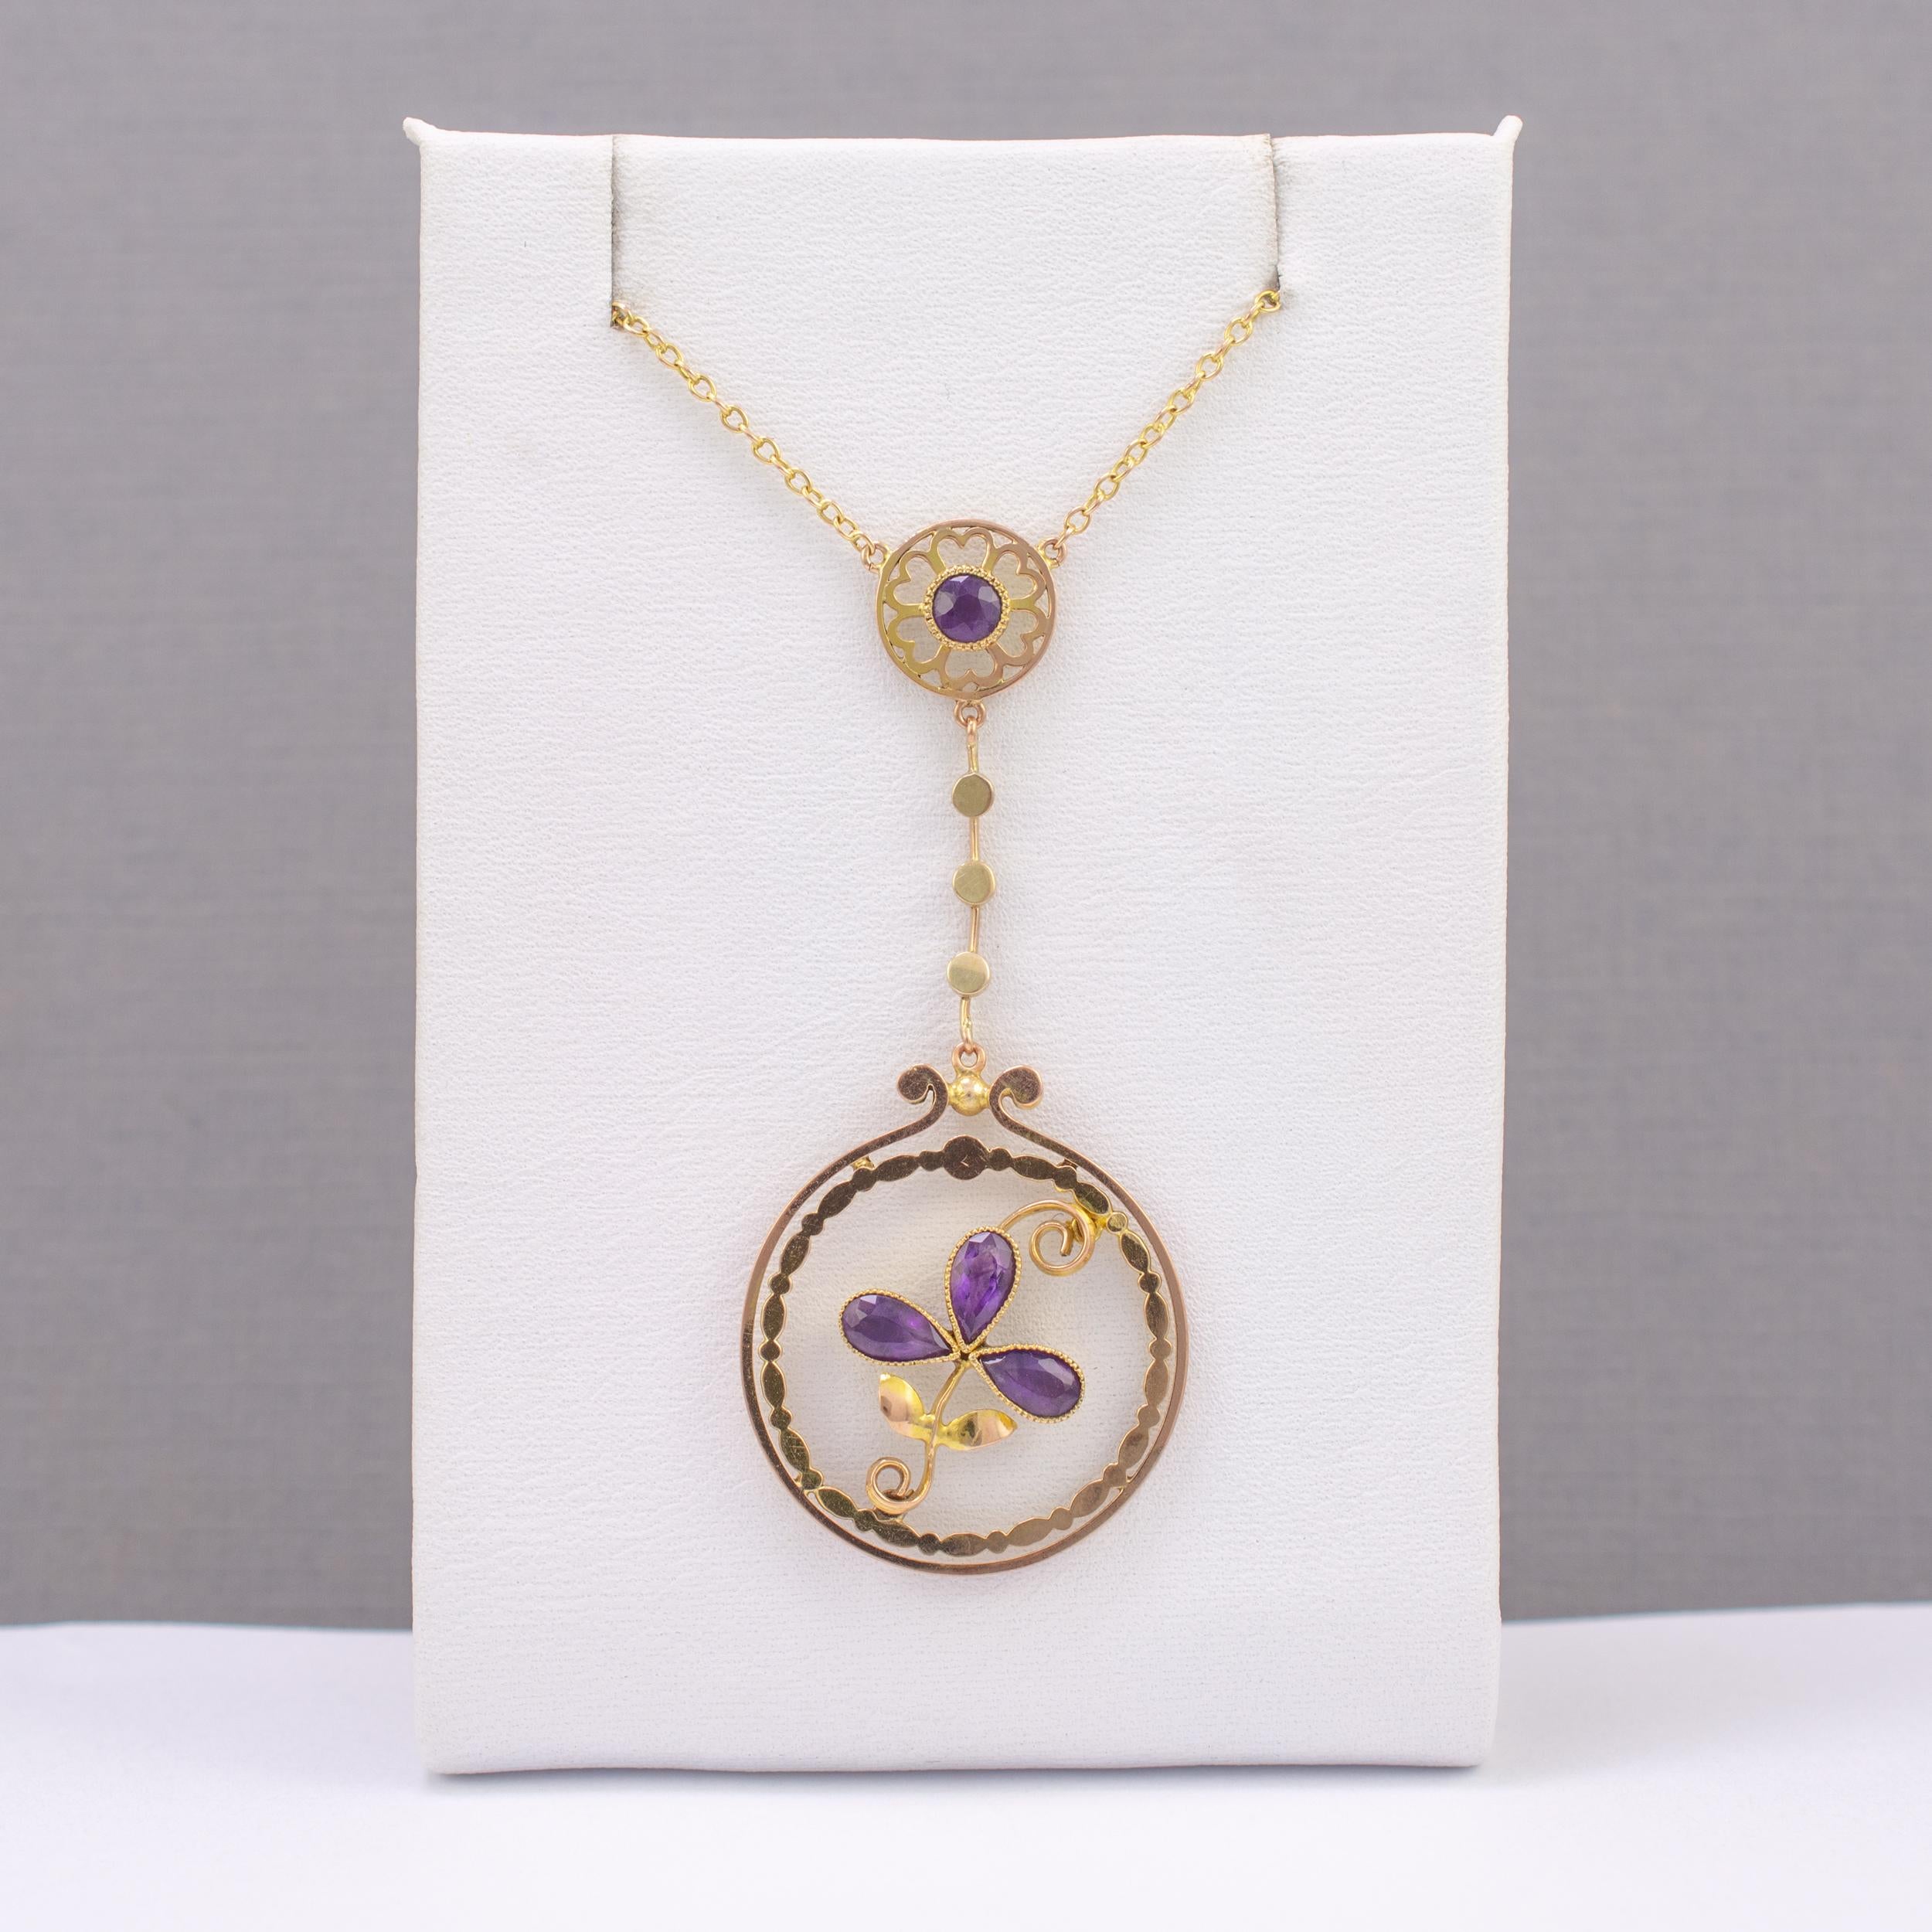 This exemplary amethyst shamrock pendant necklace is finely crafted and dates circa 1920s.

The large circle features 3 pear cut 0.25ct amethyst gemstones set in a shamrock arrangement that is suspended inside a double frame which has an inner